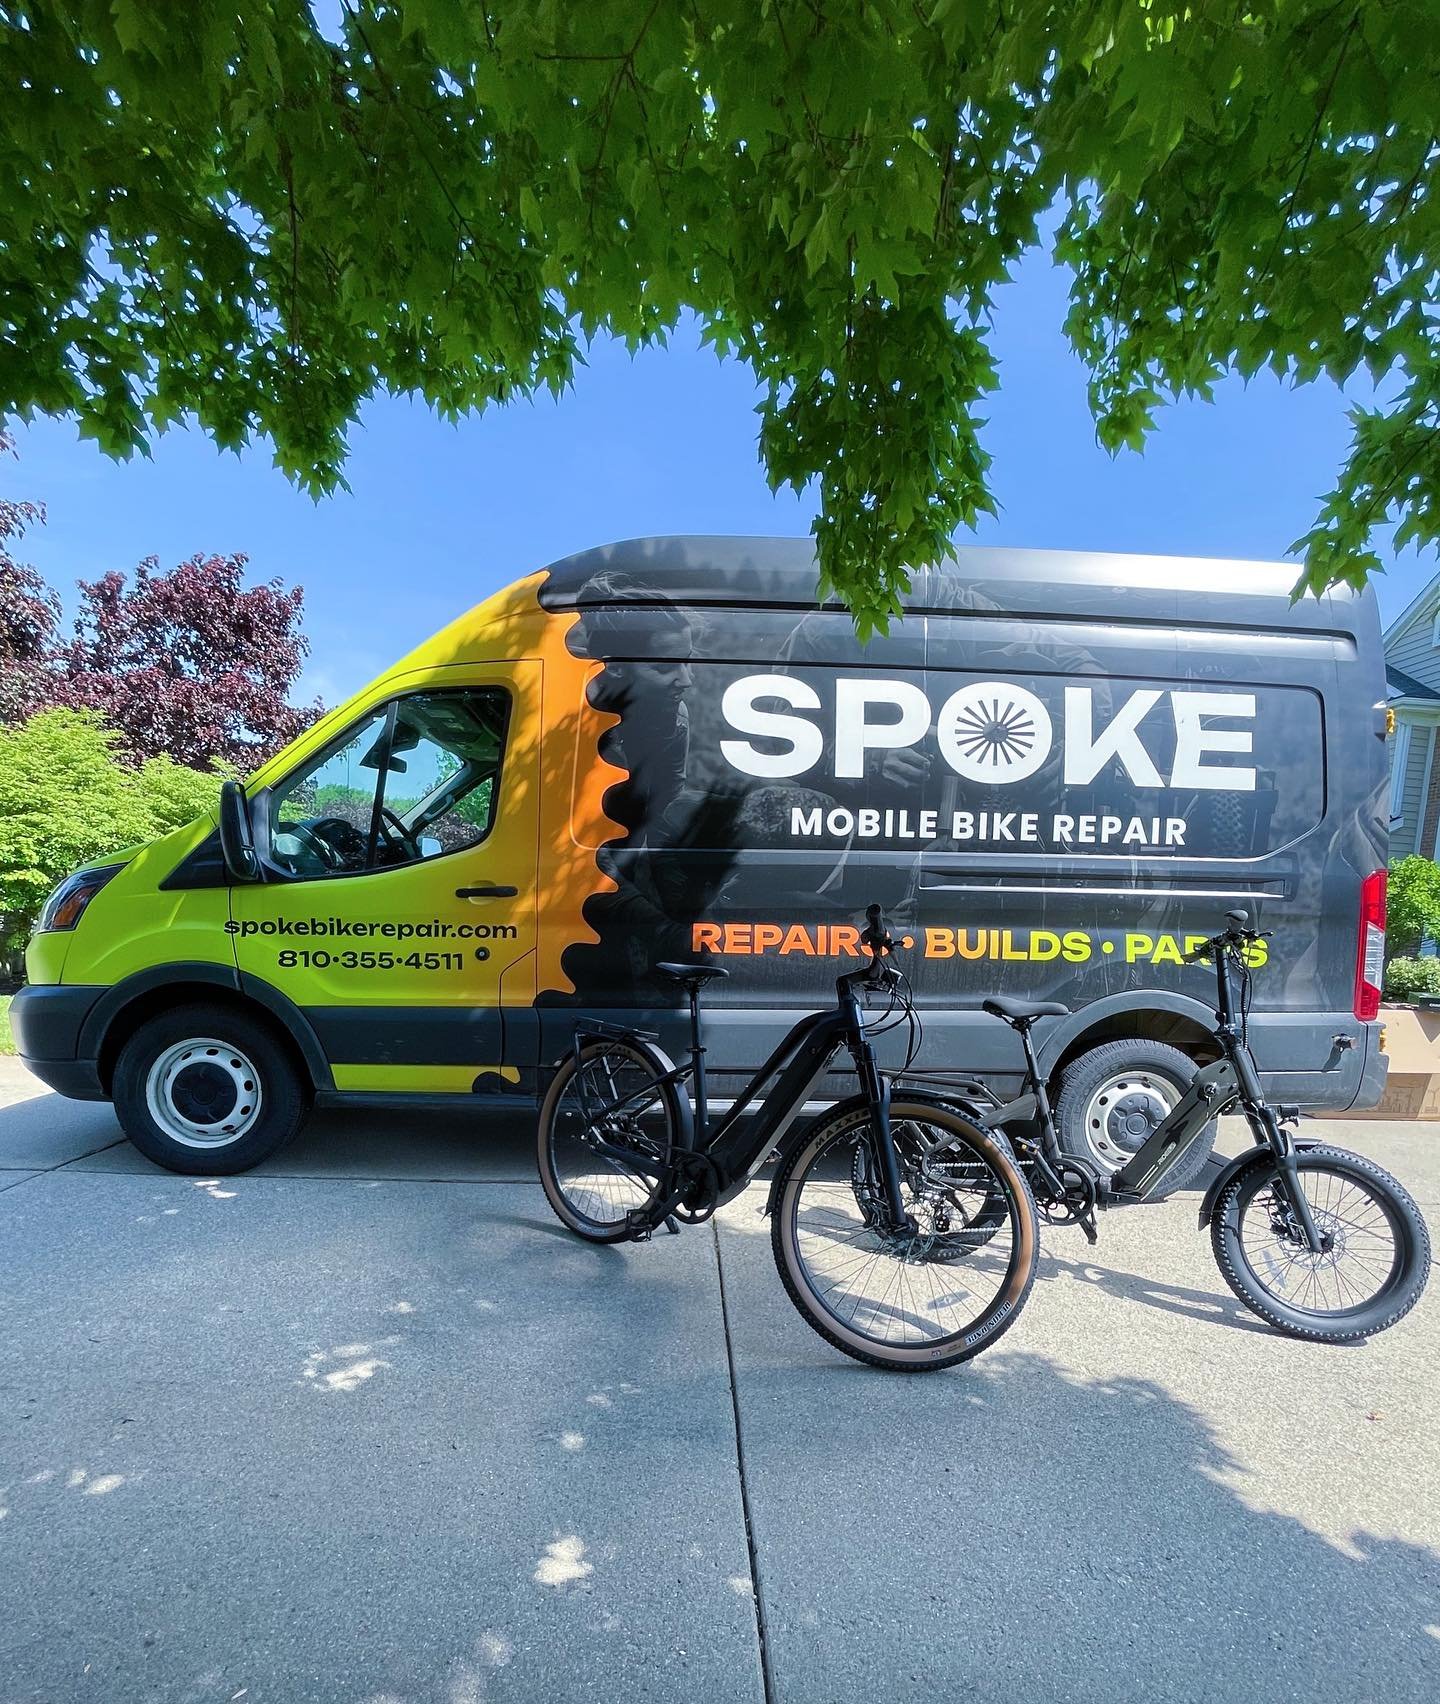 New e-bike assemblies for @ride_1up. Check &lsquo;em out, these bikes are rad!

#spokebikerepair #mobilebikeshop #ebike #commercetownship #ride1up #ridebikeshavefunfeelgood